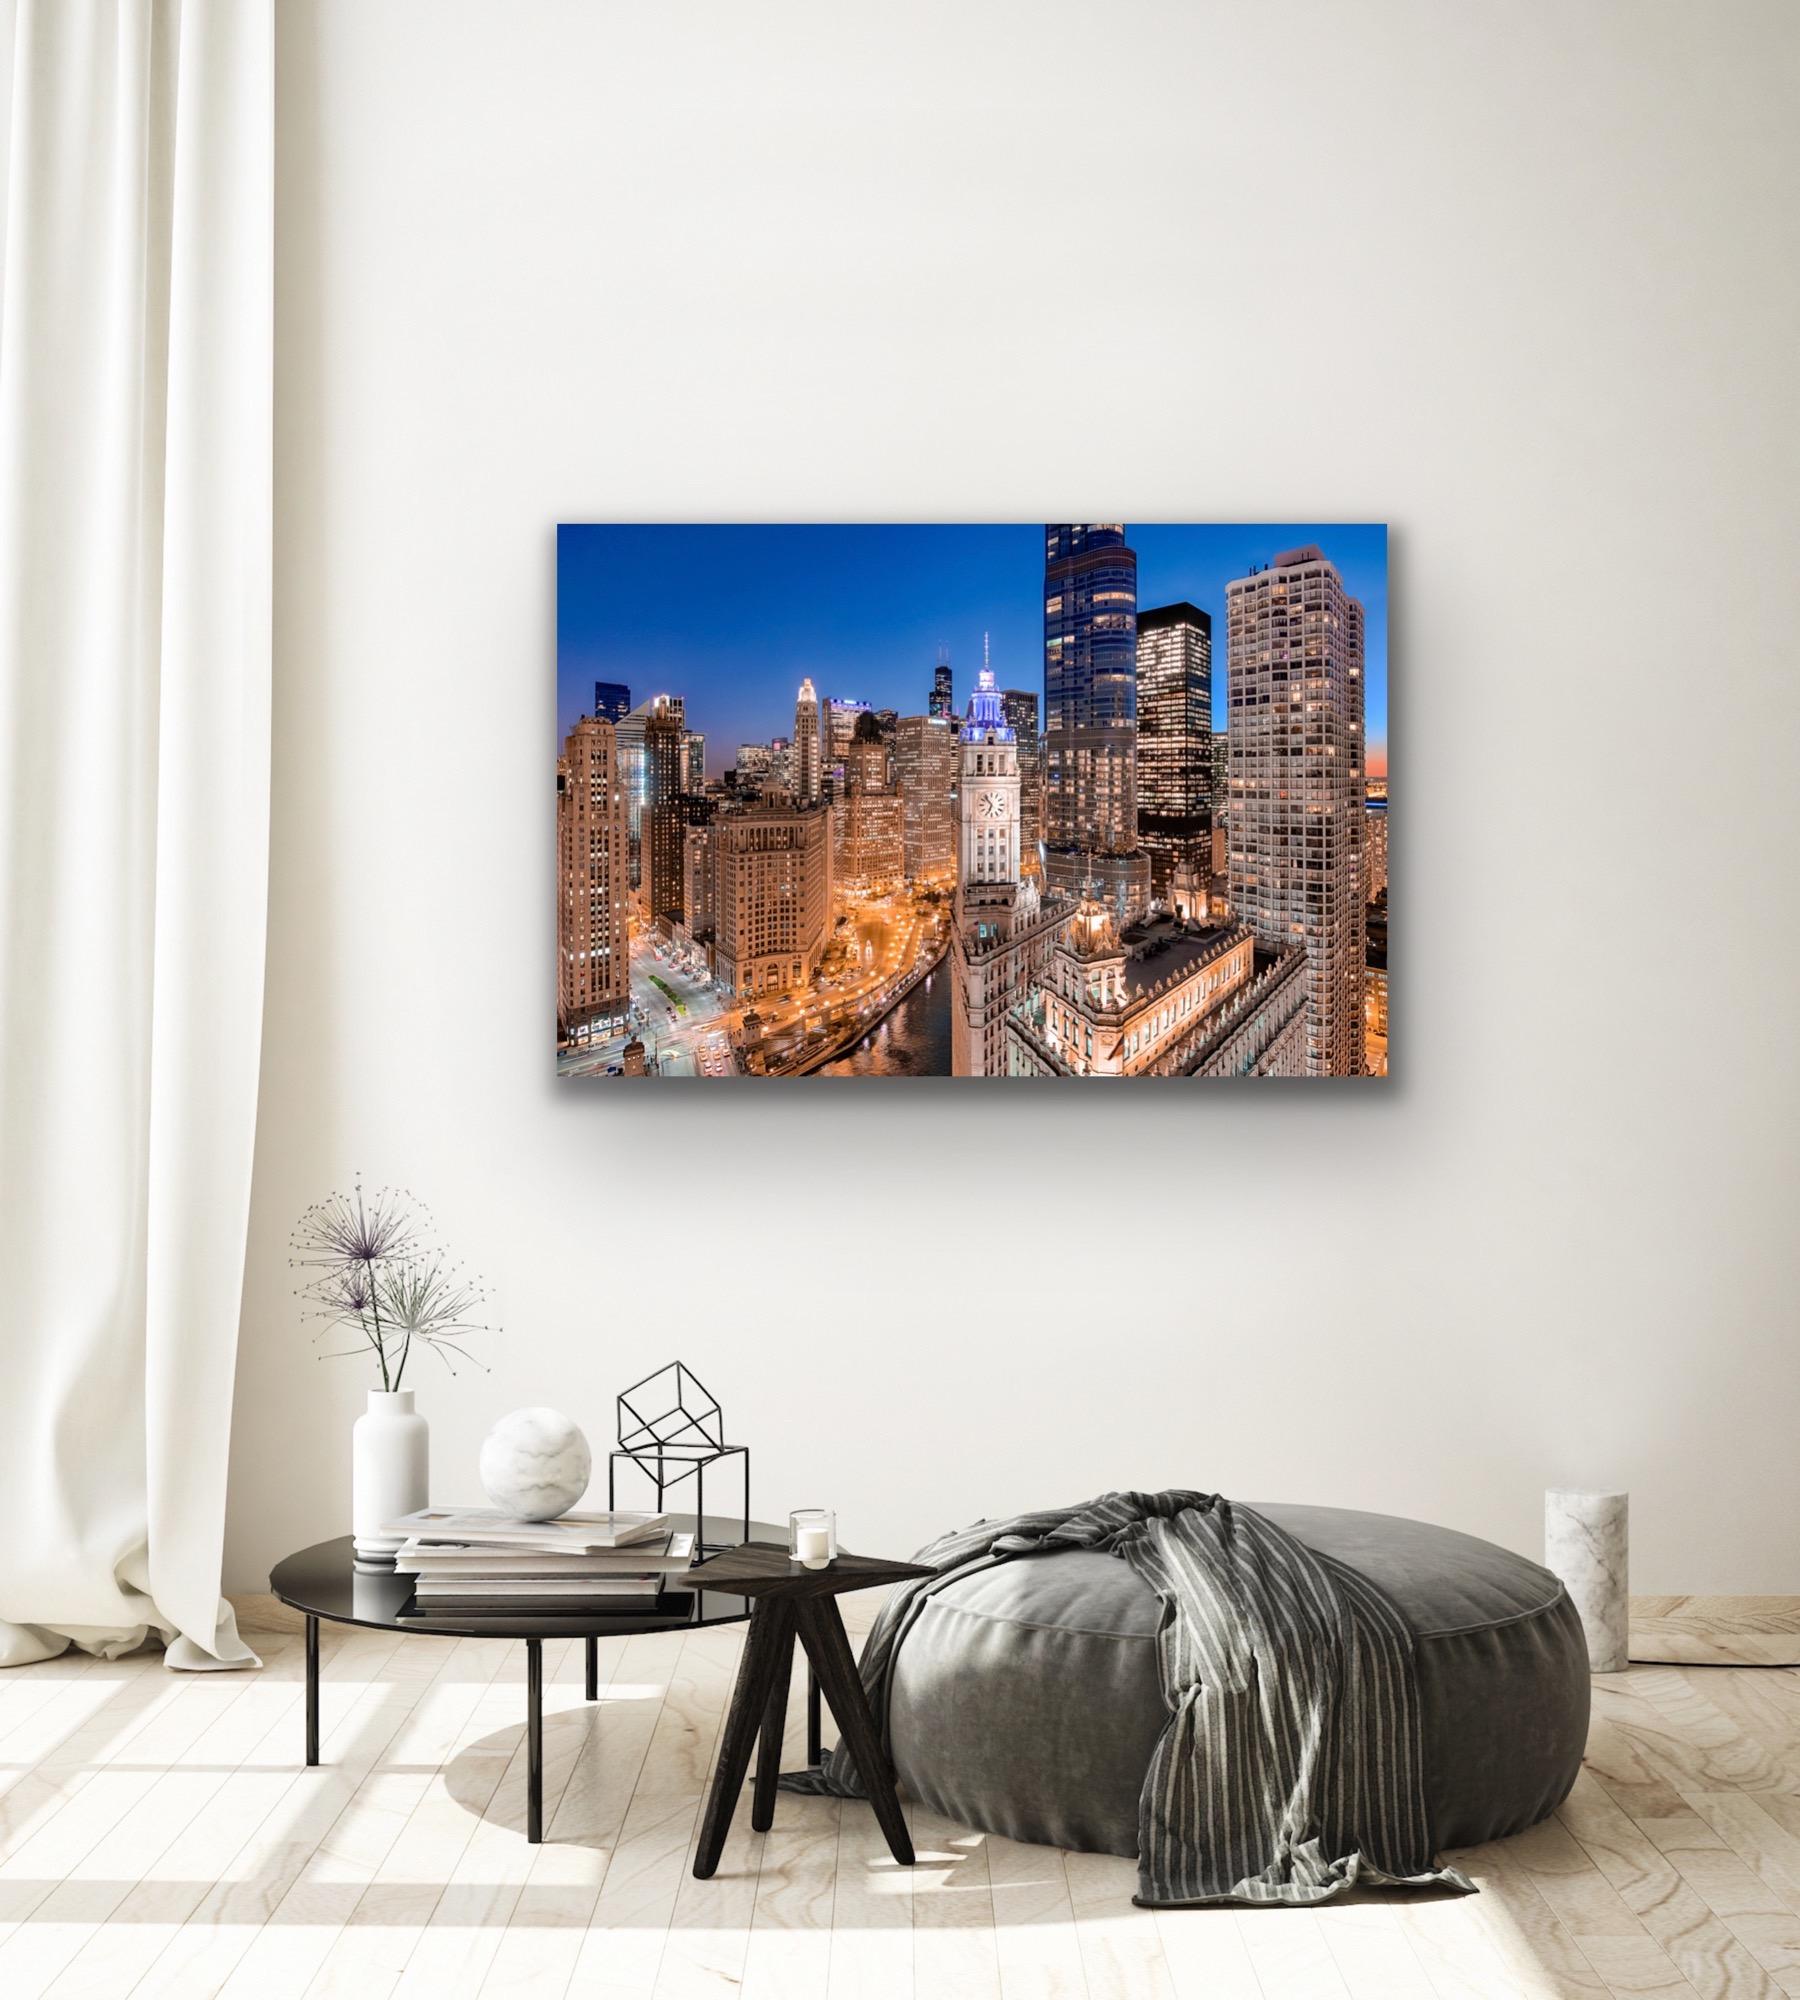 Aerial Photography, Chicago's Wacker Drive, Giclee on Metal, by Scott F. - Modern Print by Scott F. 